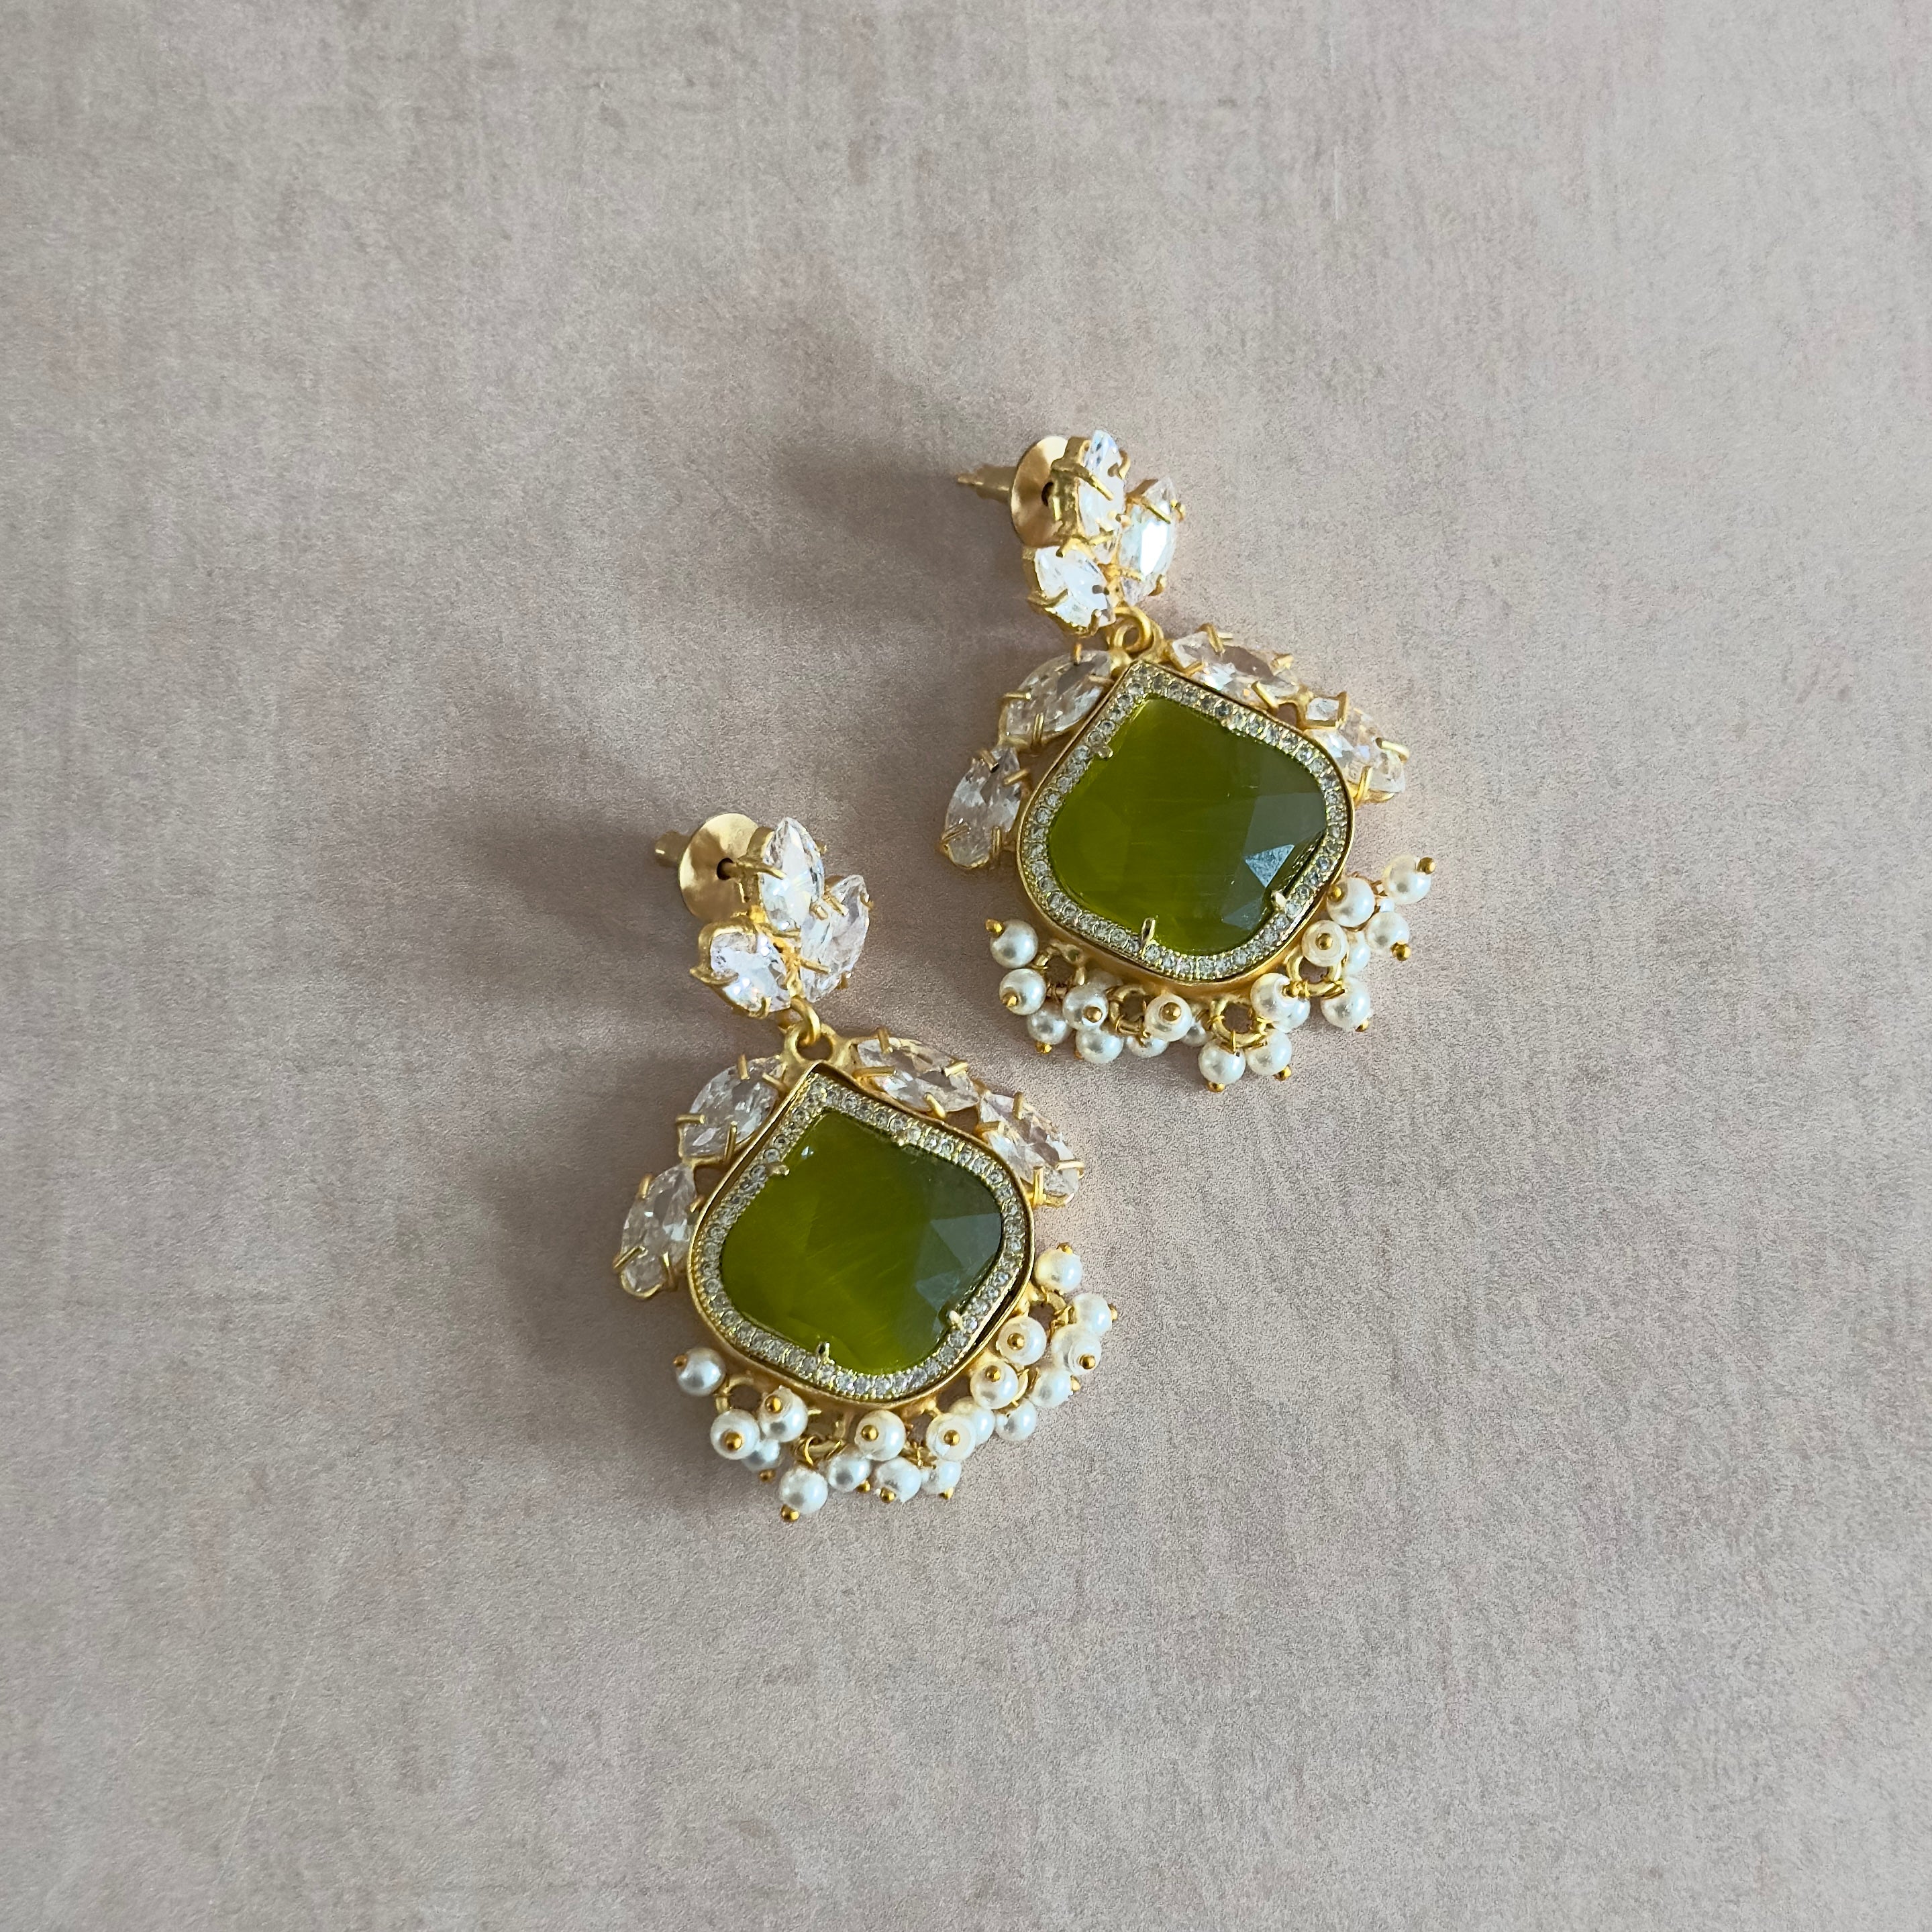 Elevate your look with our Olive Crystal Drop Earrings! The vibrant olive stone and sparkling CZ crystals make a stunning statement, adding a touch of glam to any outfit. Feel confident and effortlessly stylish with these stunning earrings. Perfect for any occasion!